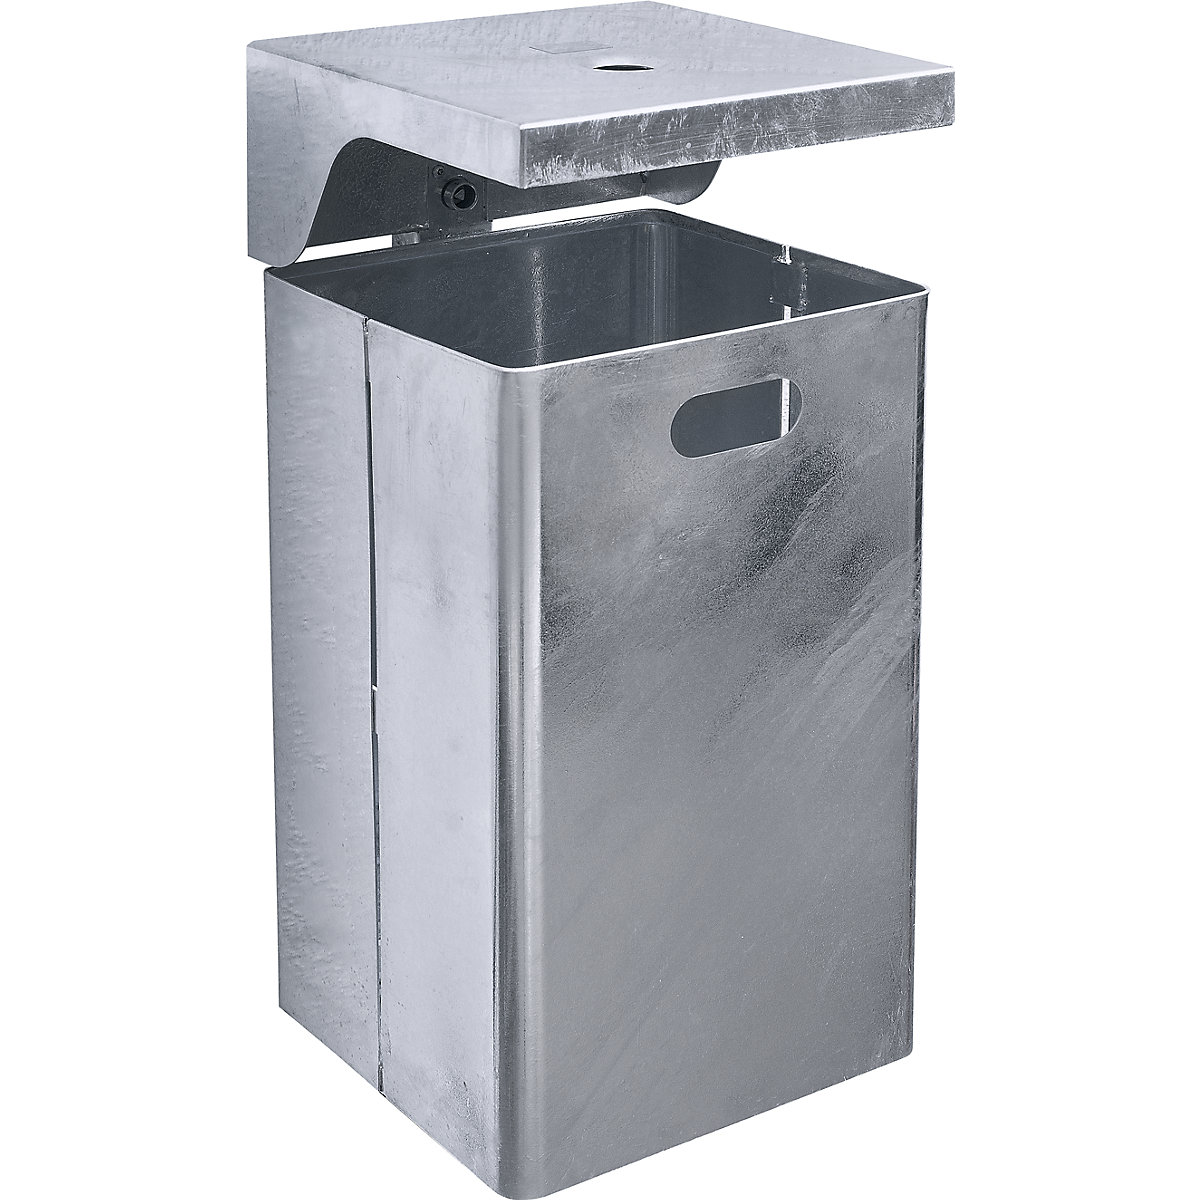 Waste collector for outdoor use, hot dip galvanised